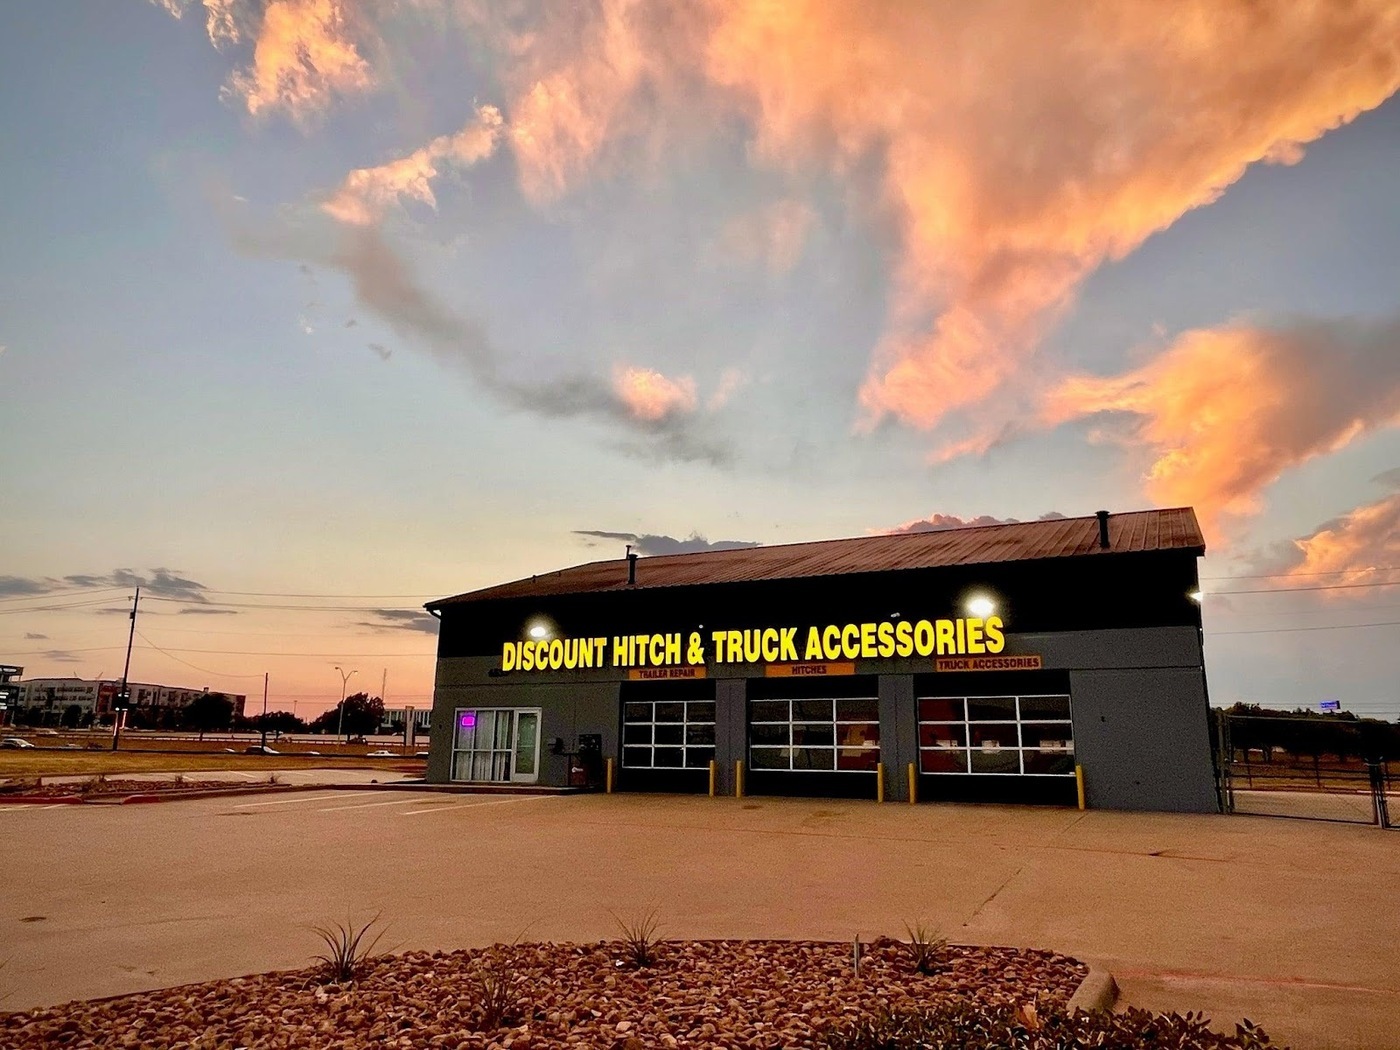 Discount Hitch & Truck Accessories is Texas’ fastest growing Truck Accessories retailer, with multiple retail stores located in different cities providing full-service installation facilities.